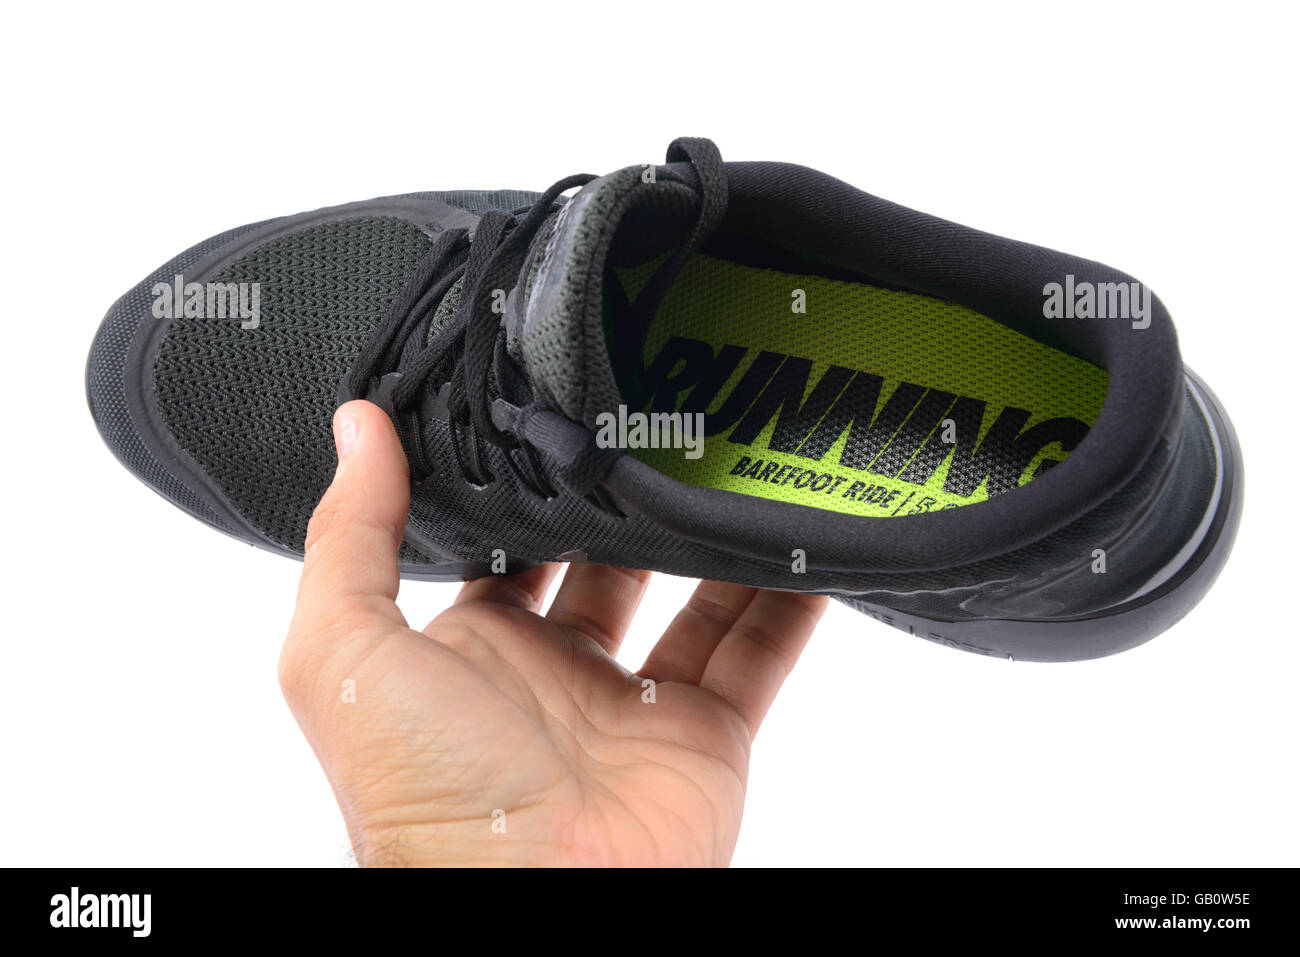 Person holding a Nike Free 5.0 Barefoot Ride black running shoe Stock Photo  - Alamy